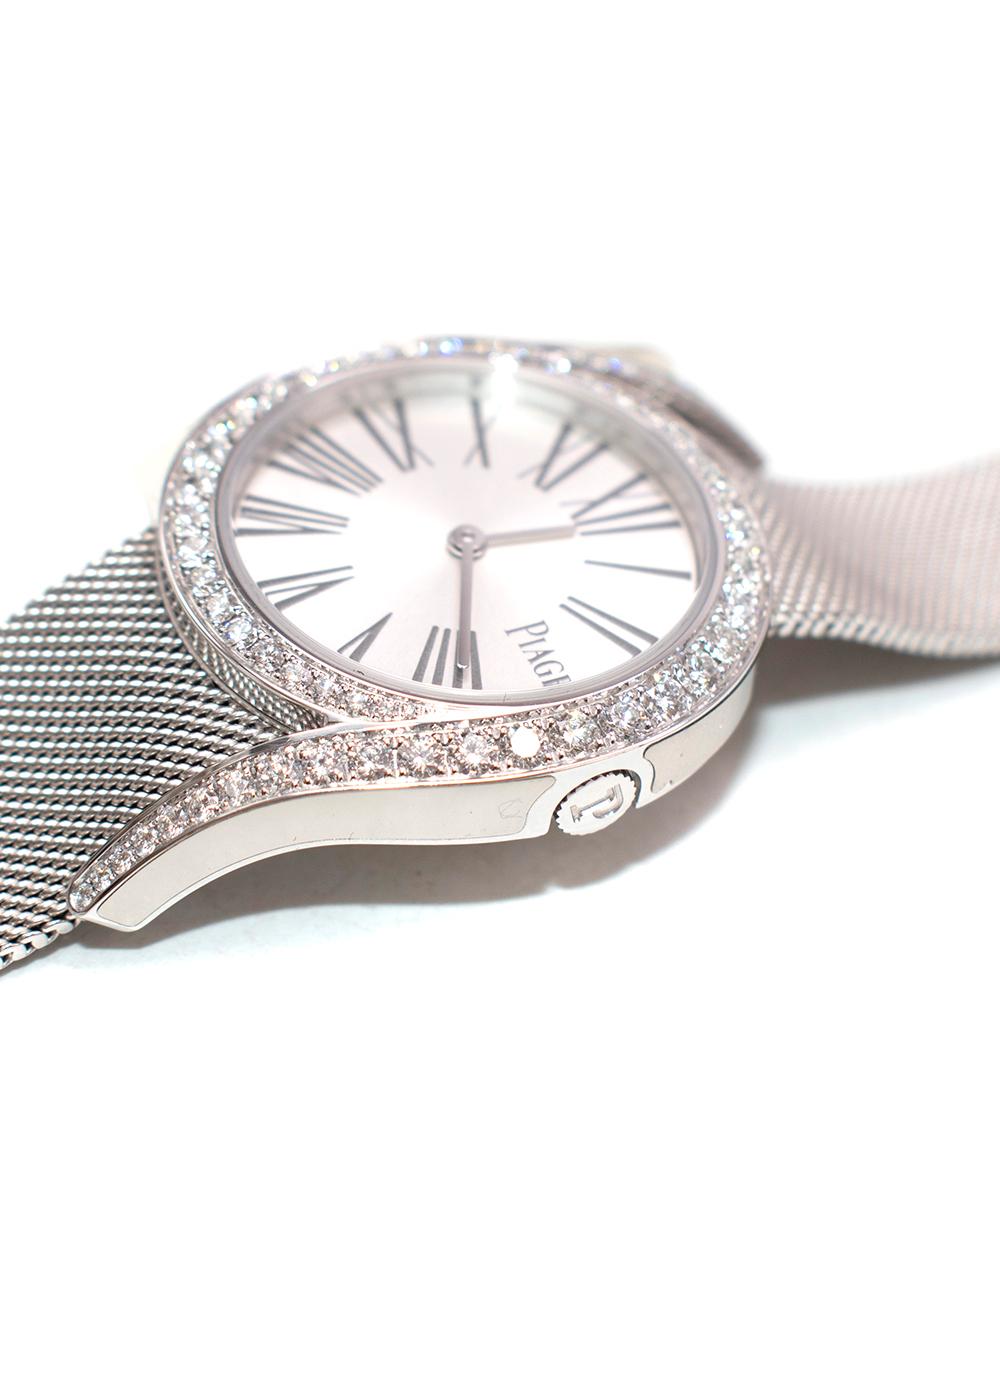 Piaget 18kt White Gold & Diamond Limelight Gala Watch For Sale 2